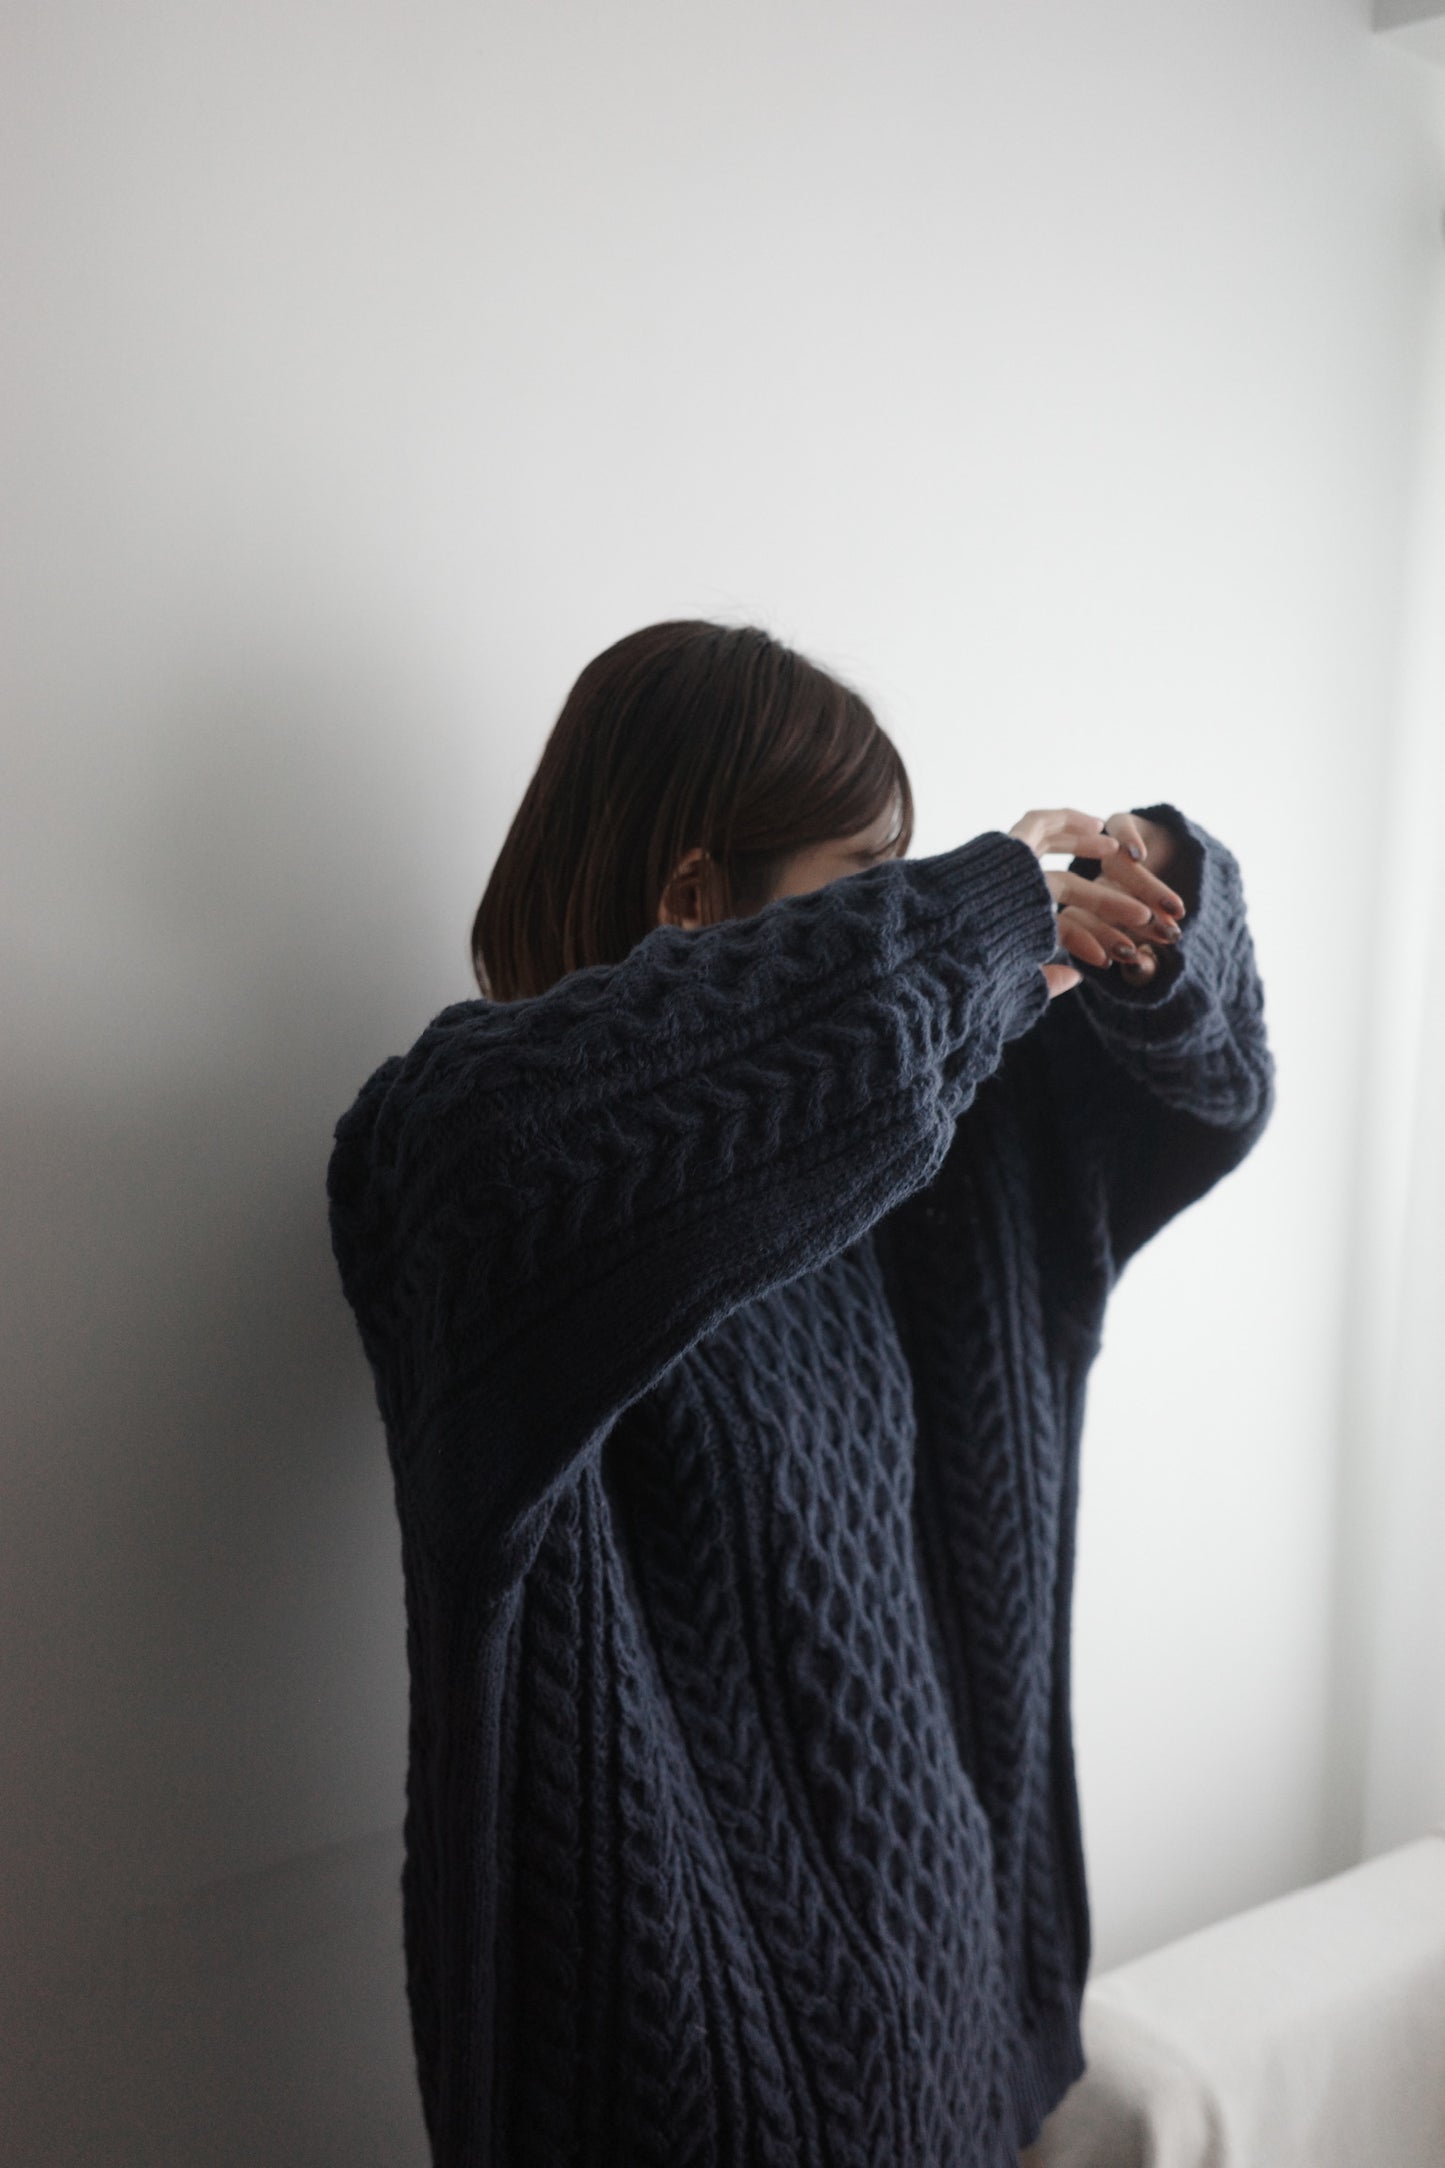 Linen Knitted Sweater